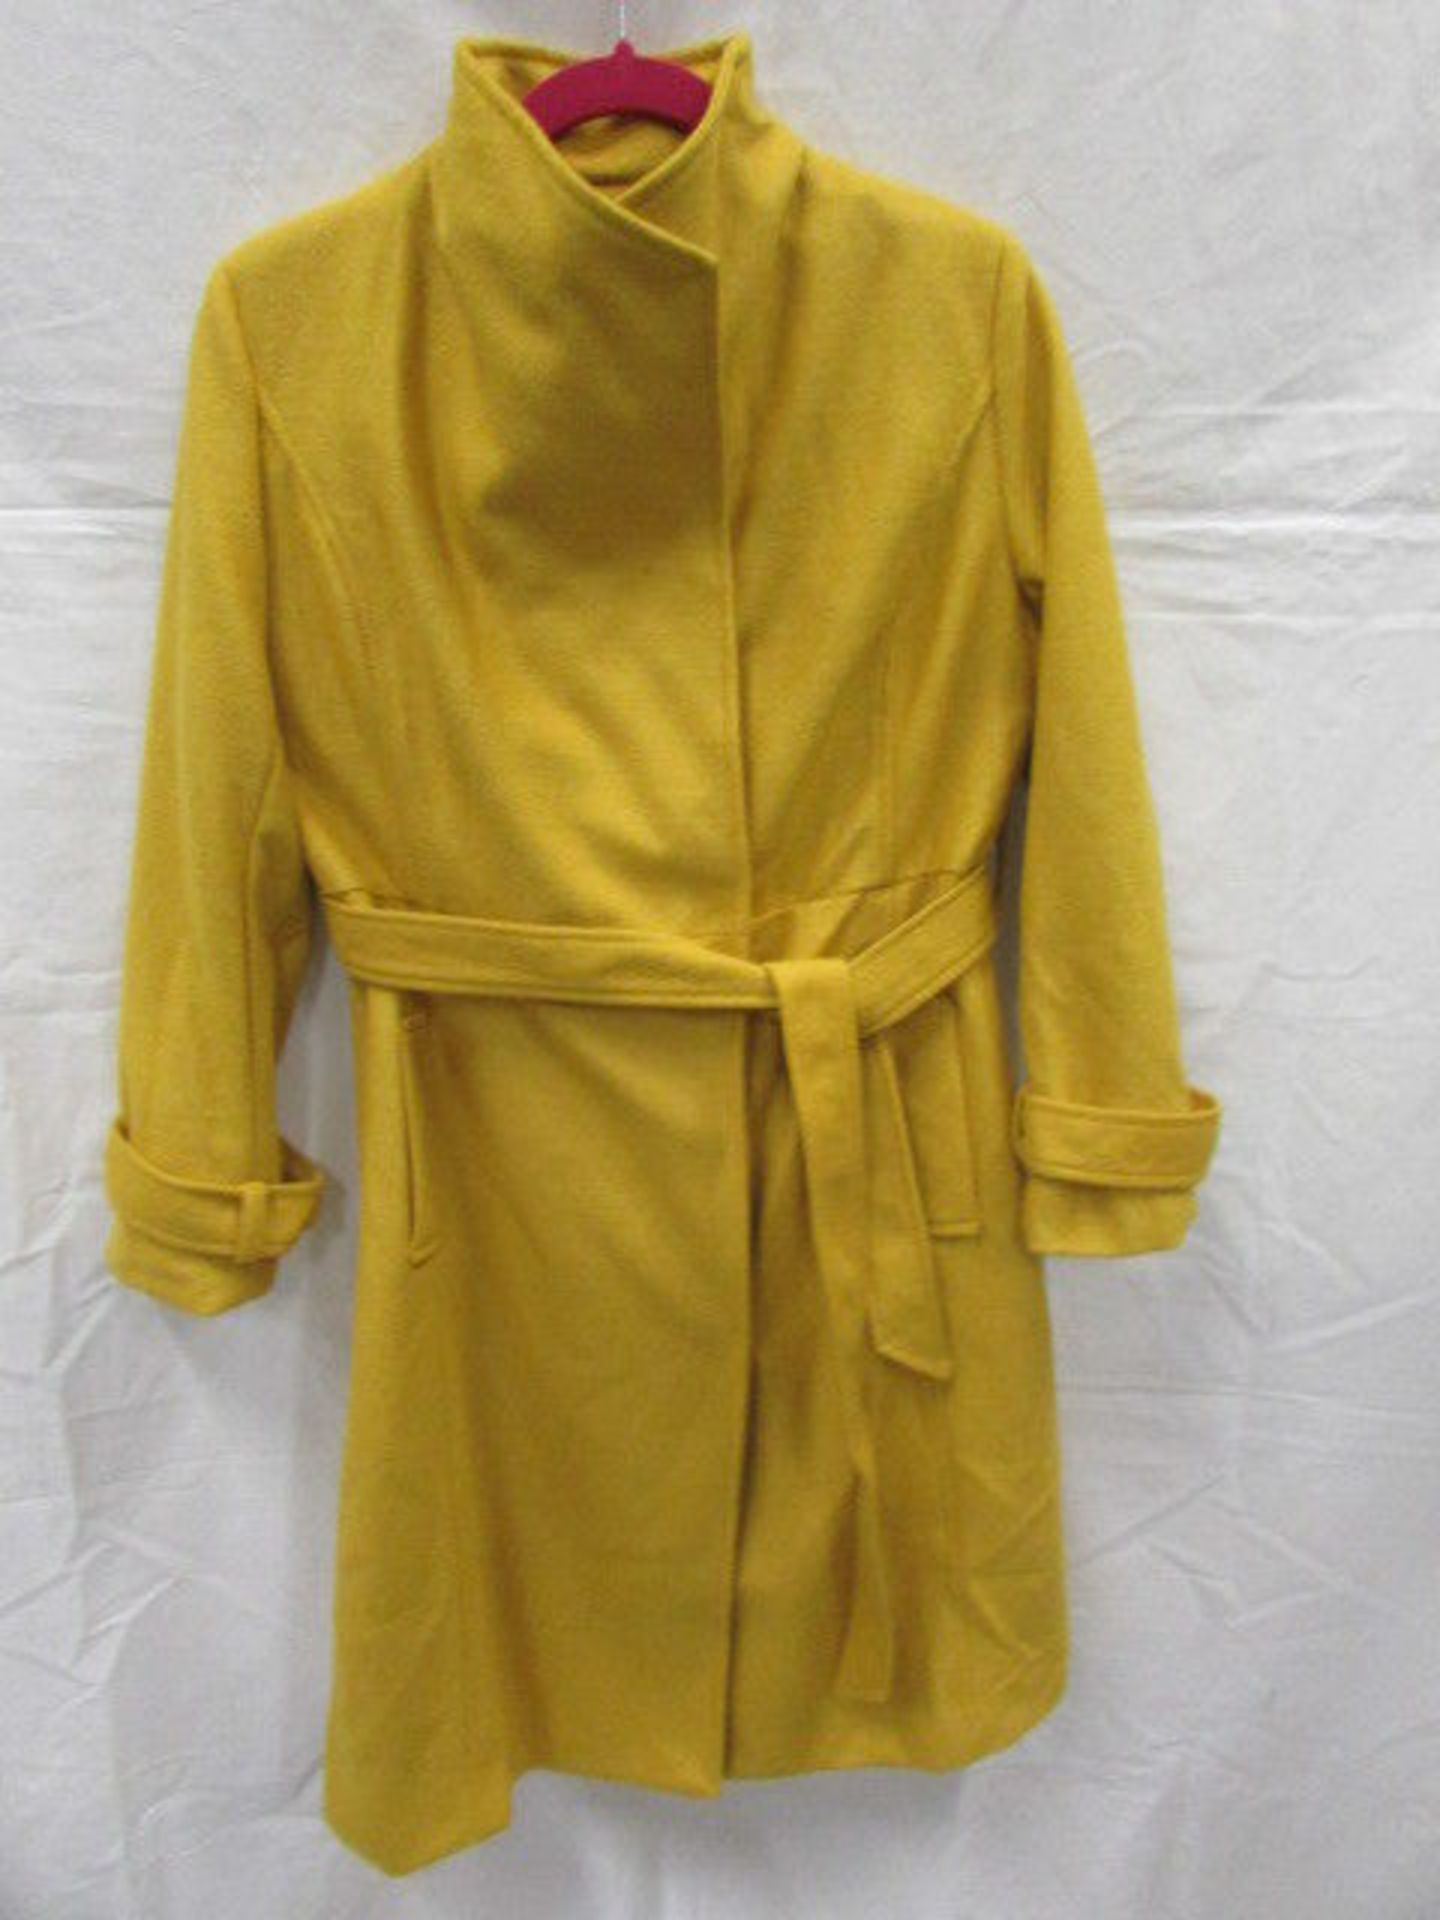 Brand New Haoduoyi Trench Coat (US 8 / UK 12) (Ref: 35 E1R)